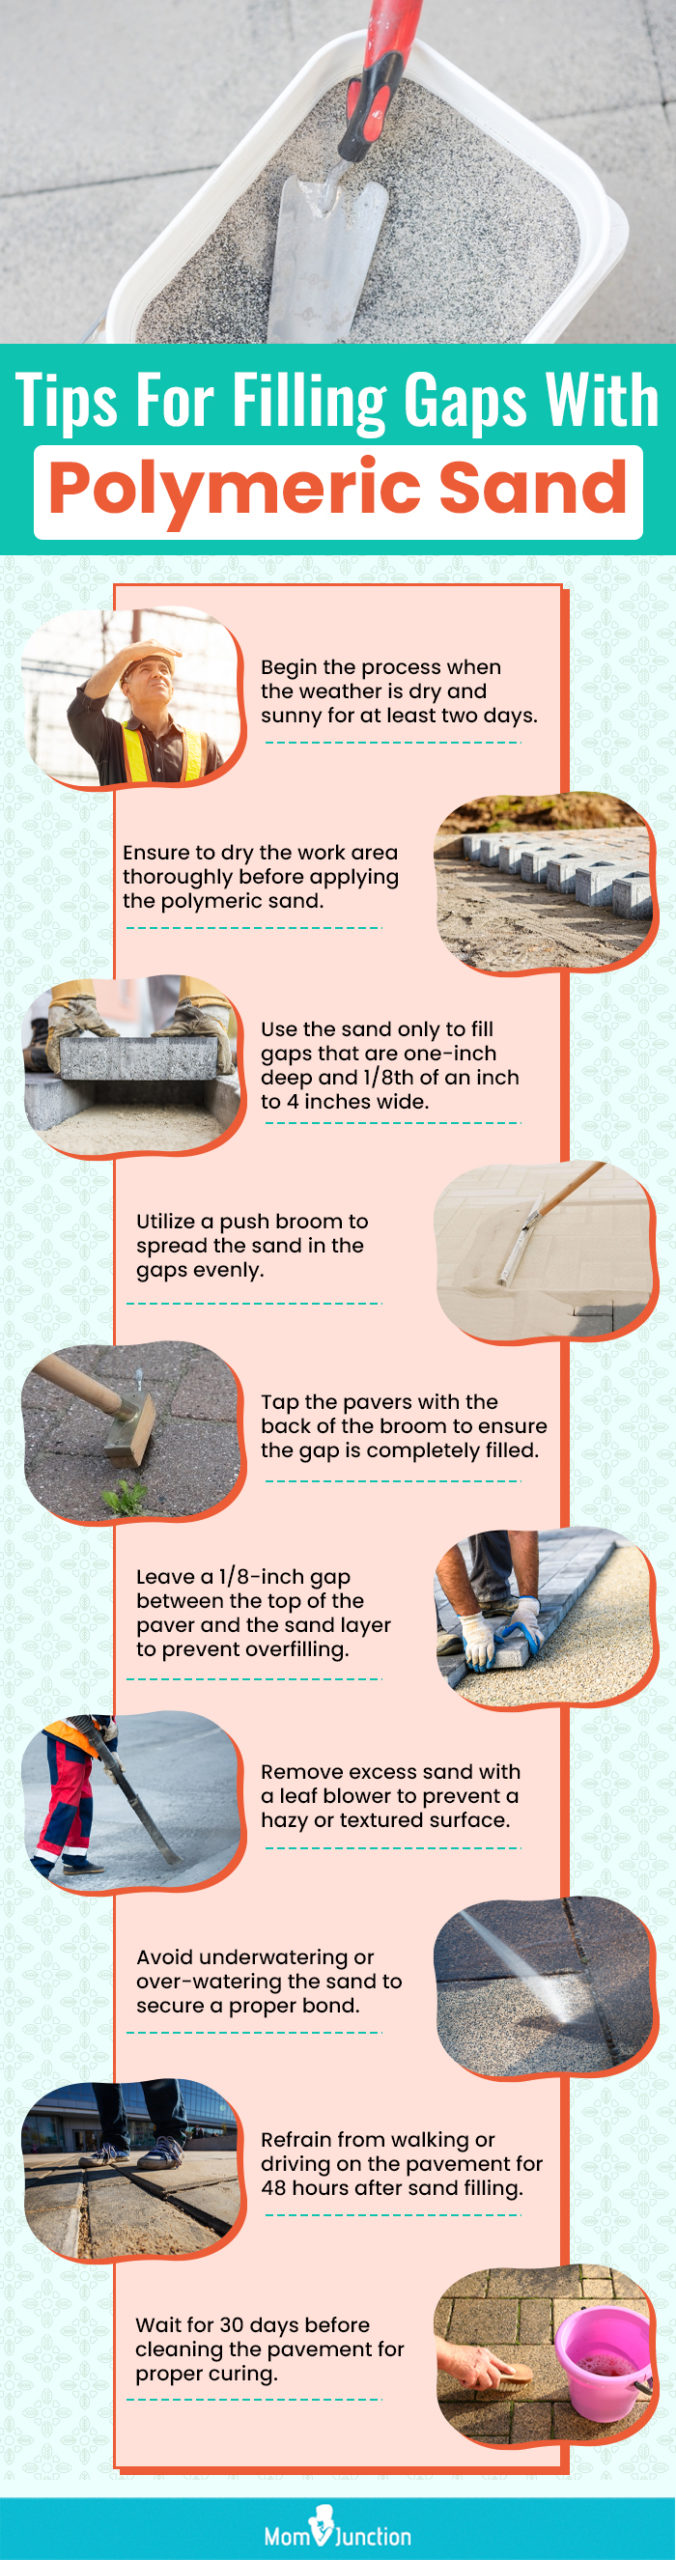 Tips For Filling Gaps With Polymeric Sand (infographic)